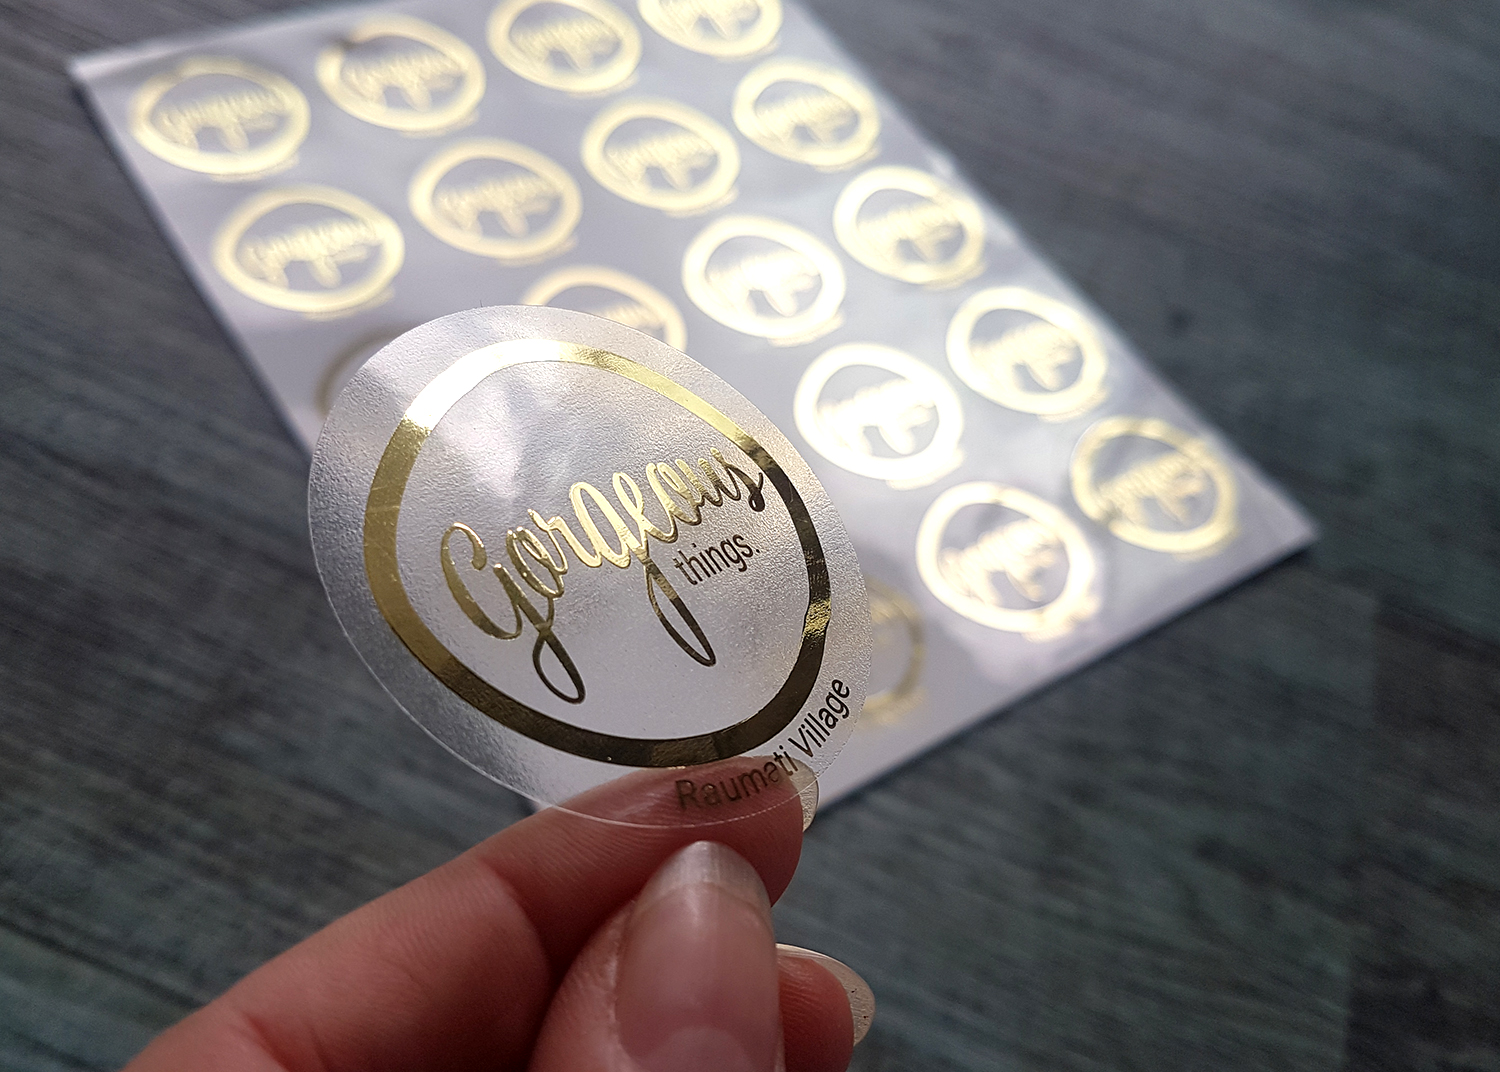 "Looking for affordable, high-quality Transparent Stickers and Graphics? GurgaonGraphics has got you covered. Contact us today to get started."